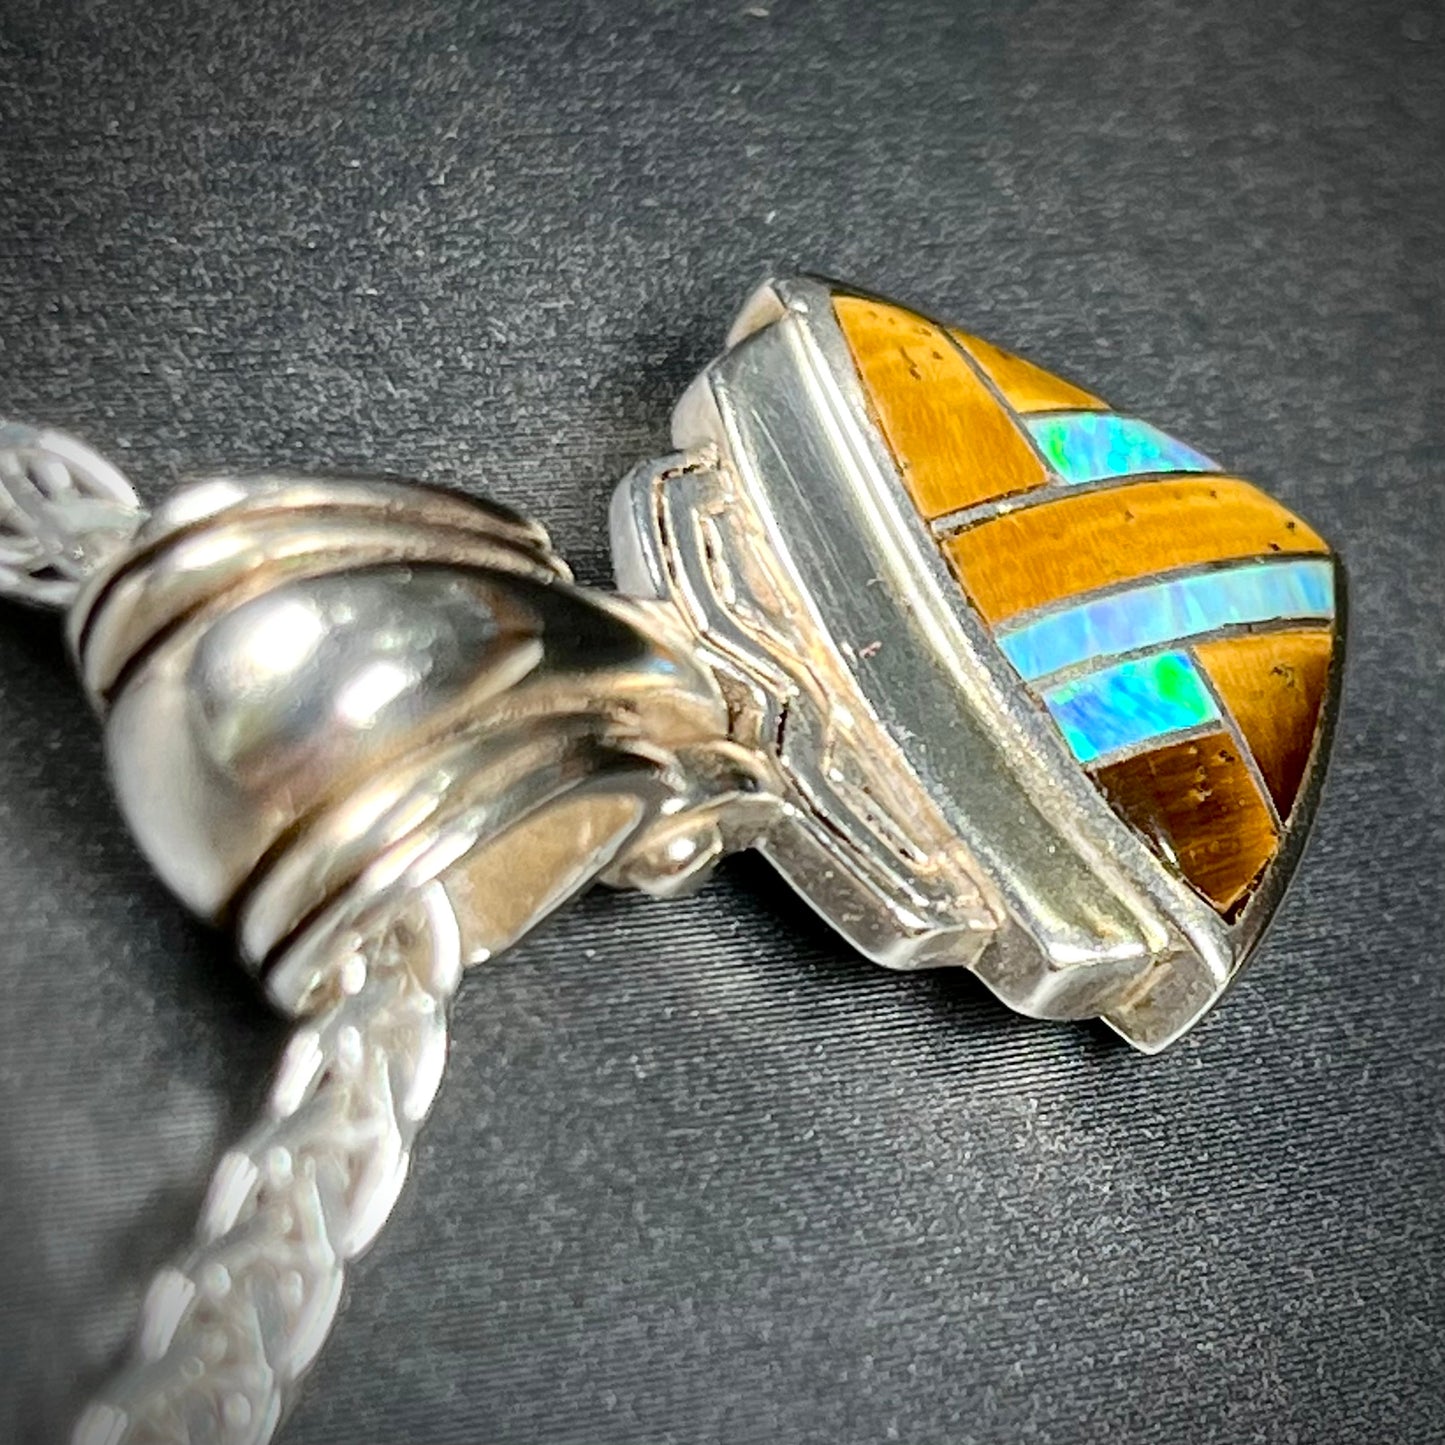 Tigers Eye and synthetic opal triangle inlay pendant set in sterling silver.